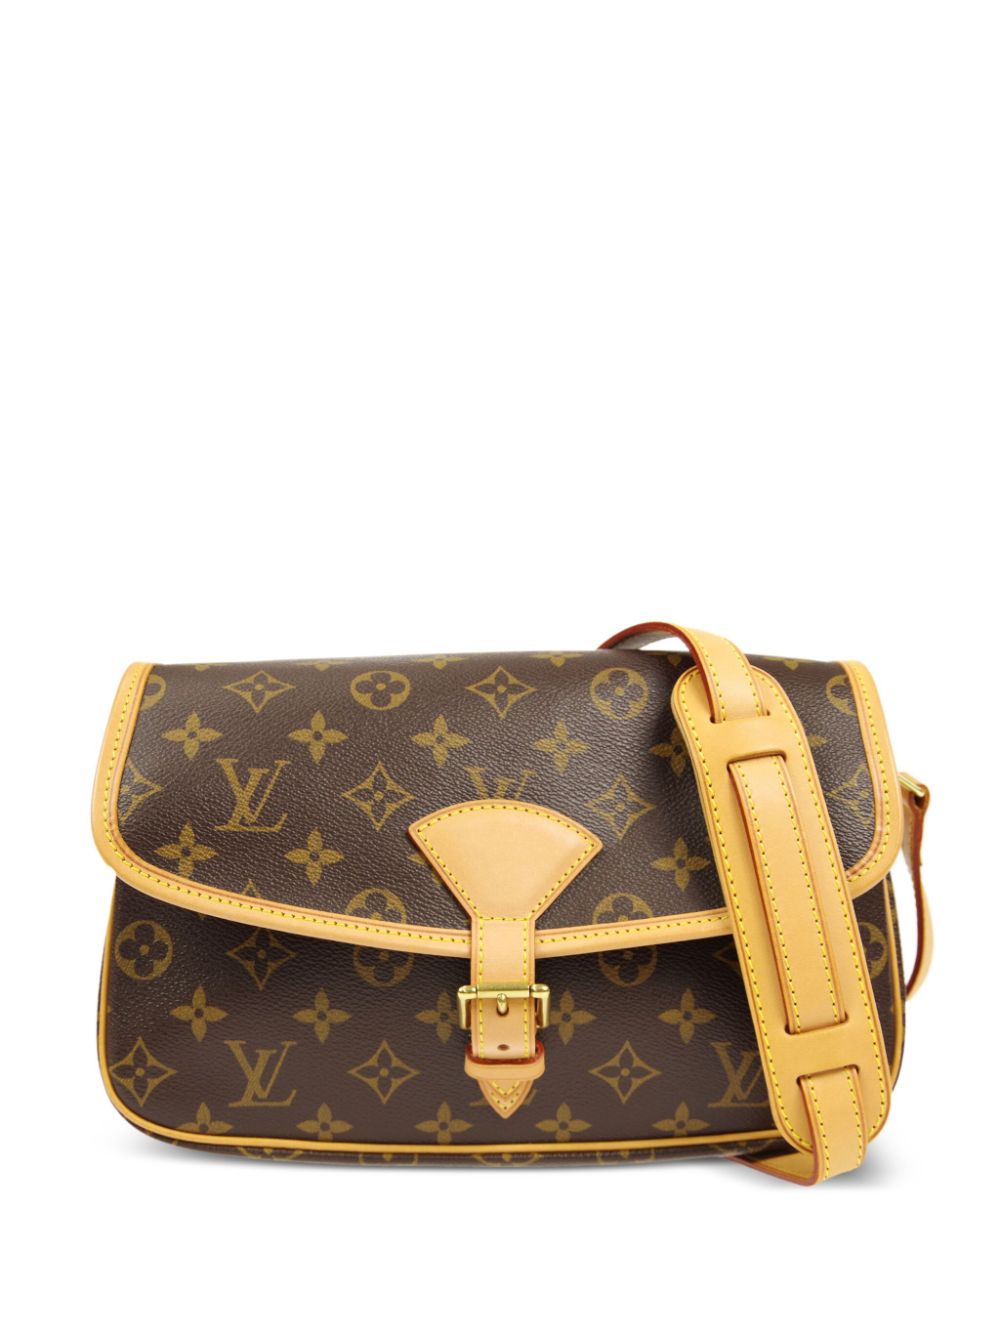 Louis Vuitton 2011 pre-owned Monogram Sologne shoulder bag - Brown -  Realry: A global fashion sites aggregator